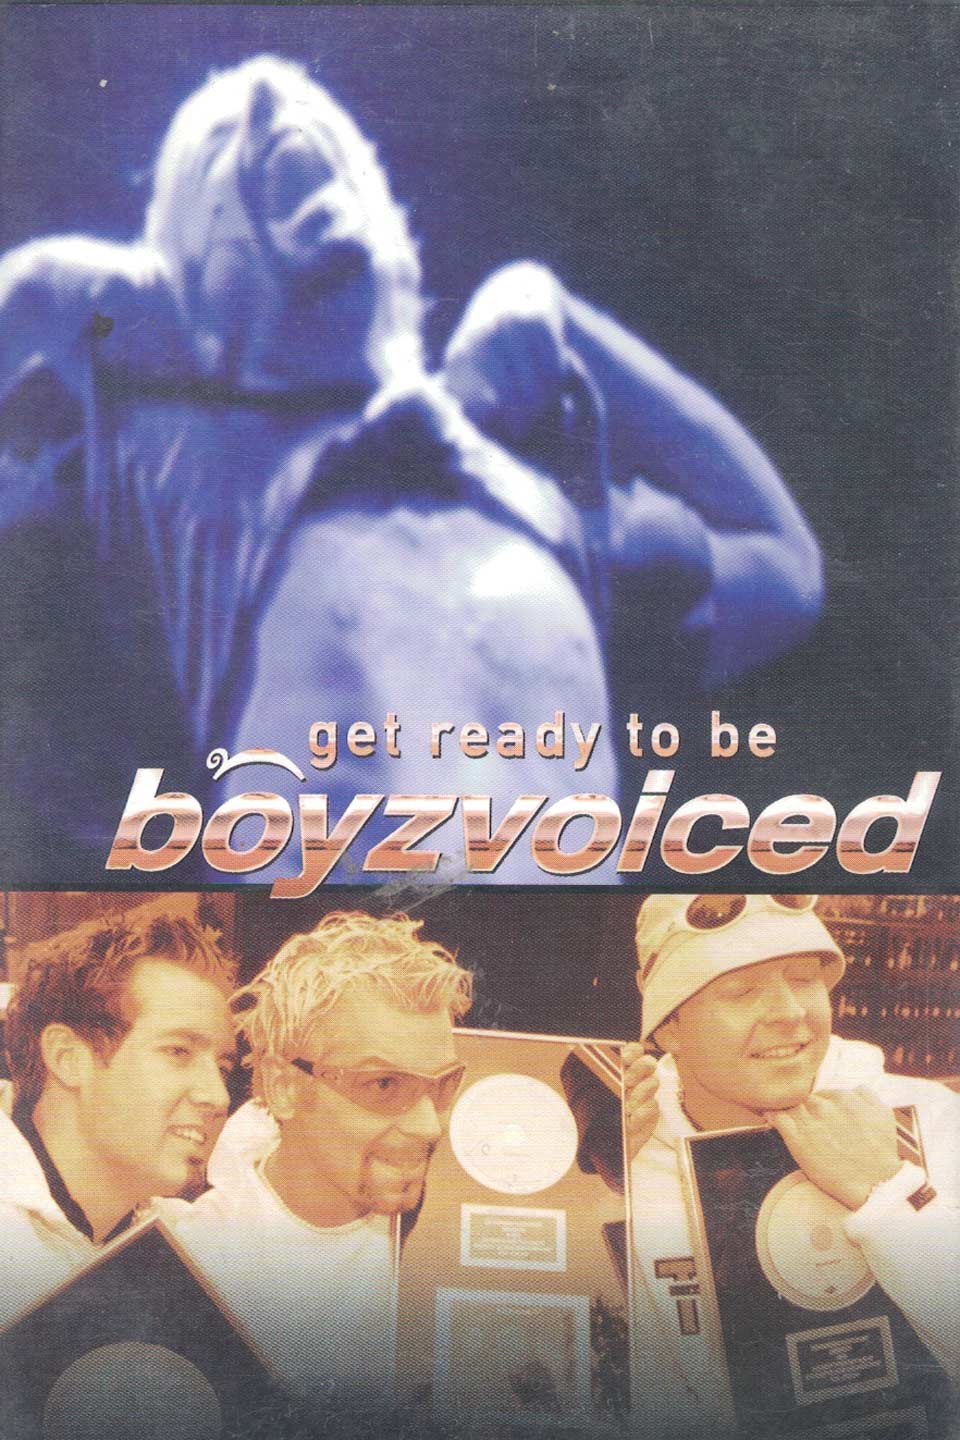 Get ready to be Boyzvoiced